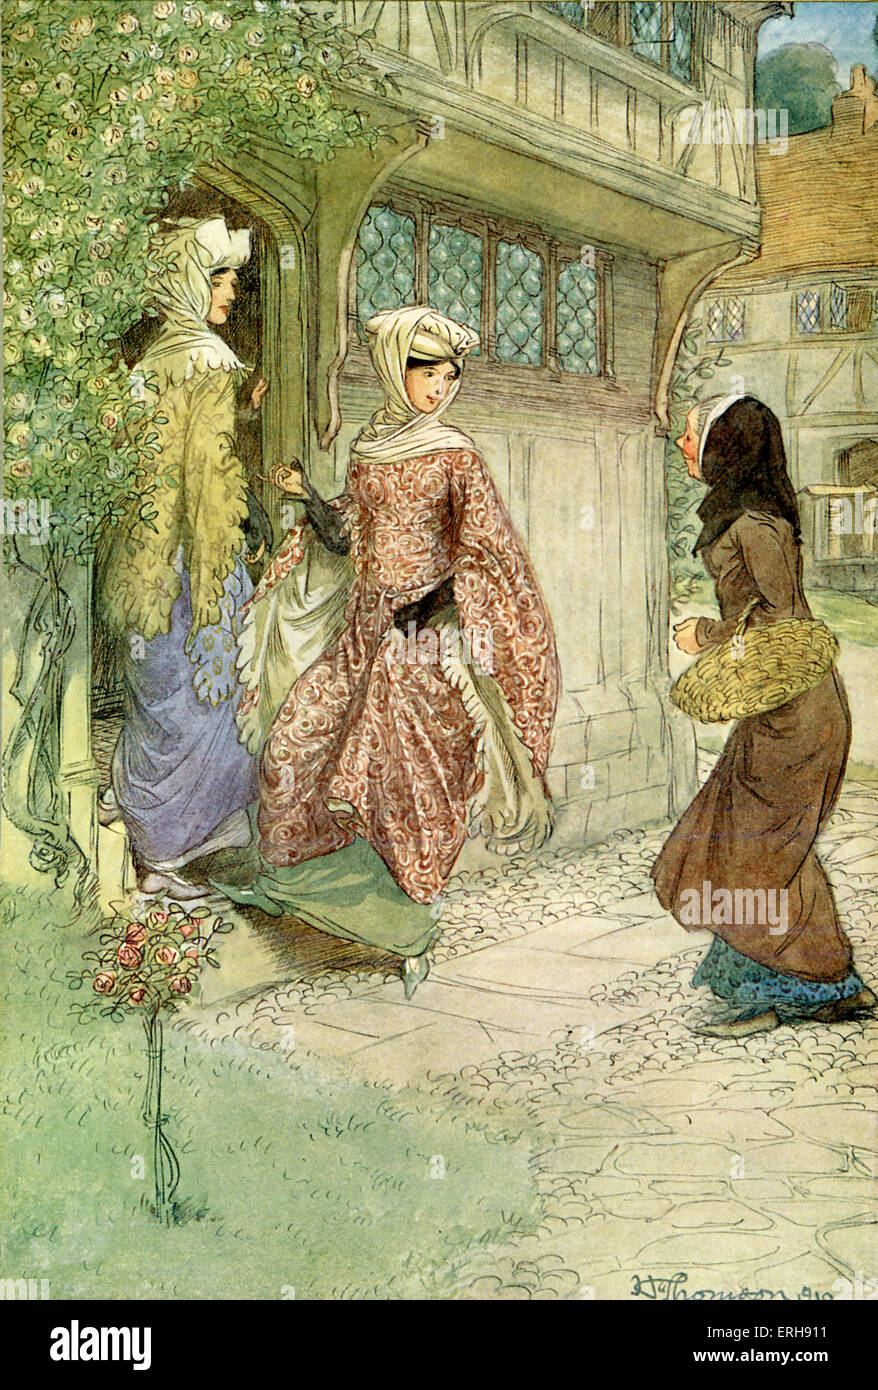 The Merry Wives of Windsor by William Shakespeare. Illustration by Hugh Thomson, 1910. Act II, Scene 1. Caption: [Mistress Page Stock Photo